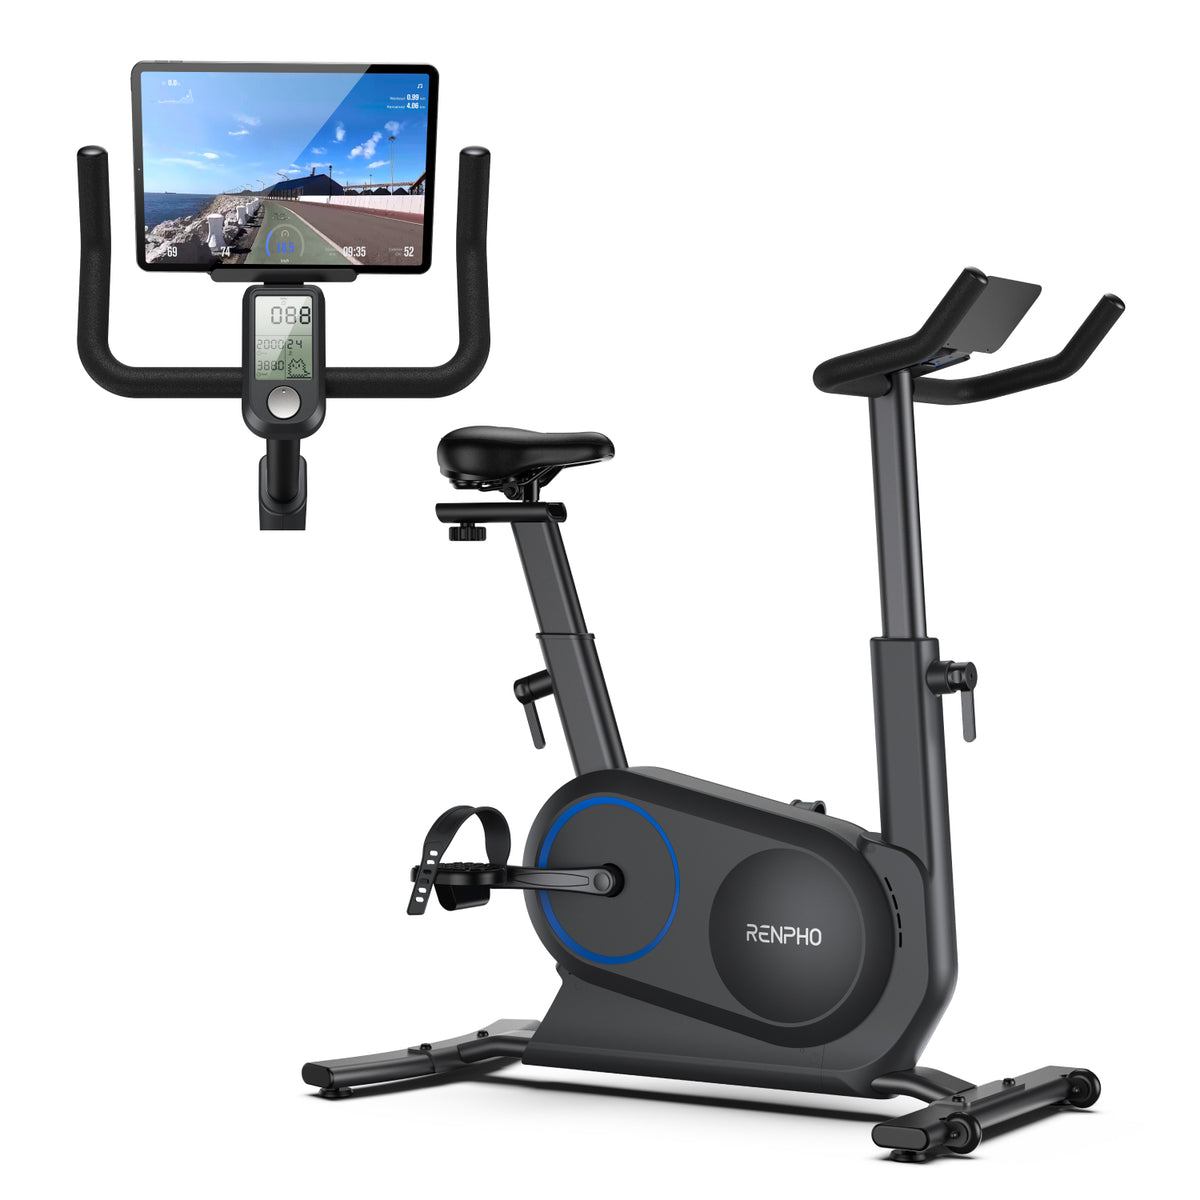 An image of a modern AI Smart Bike S by Renpho EU. It features a sleek design with a digital monitor, a large padded seat, and adjustable handlebars. A tablet is mounted displaying a scenic